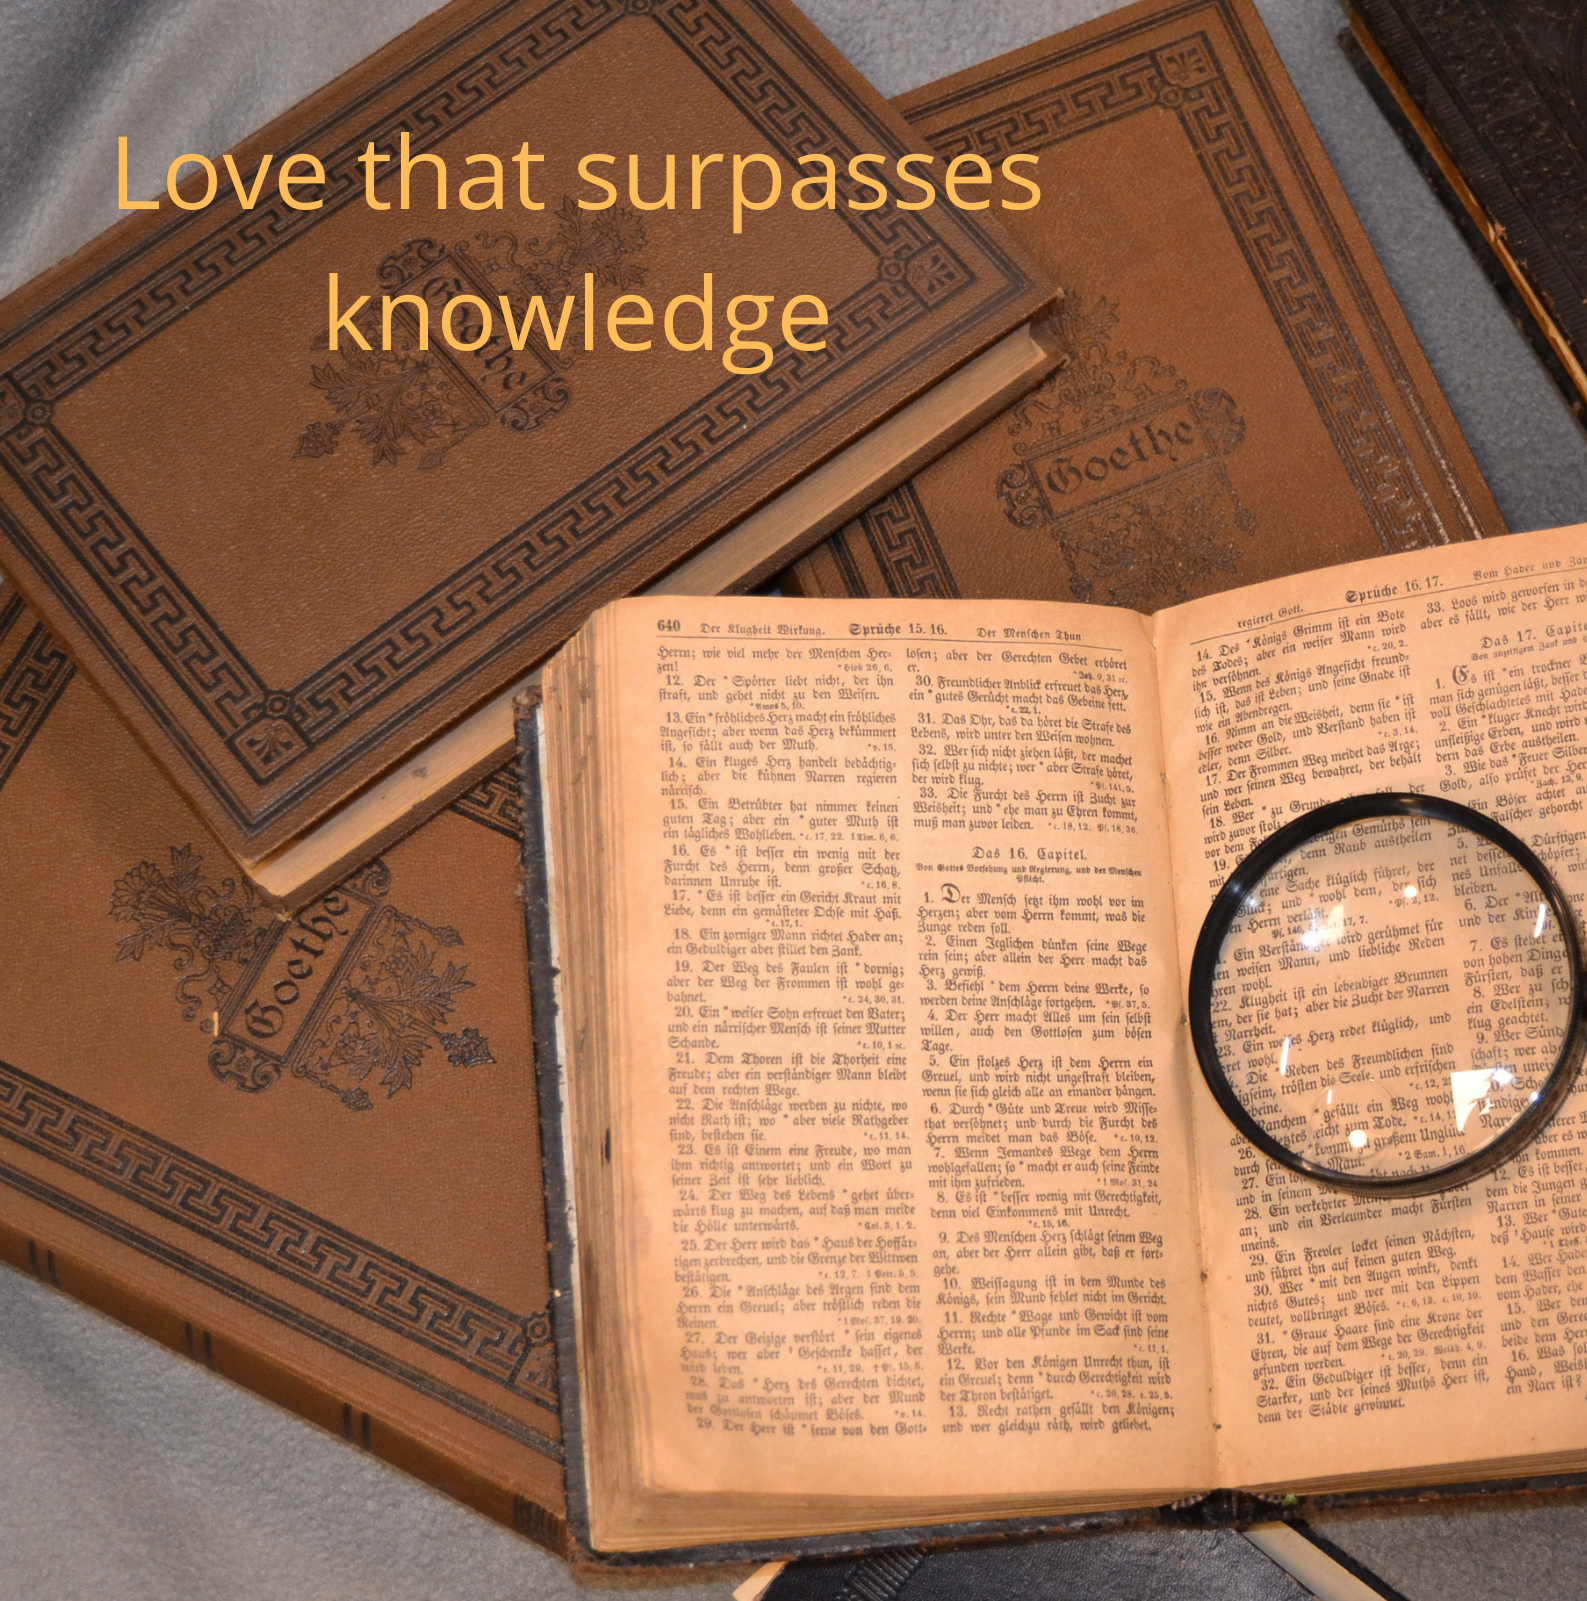 The Love that Surpasses Knowledge